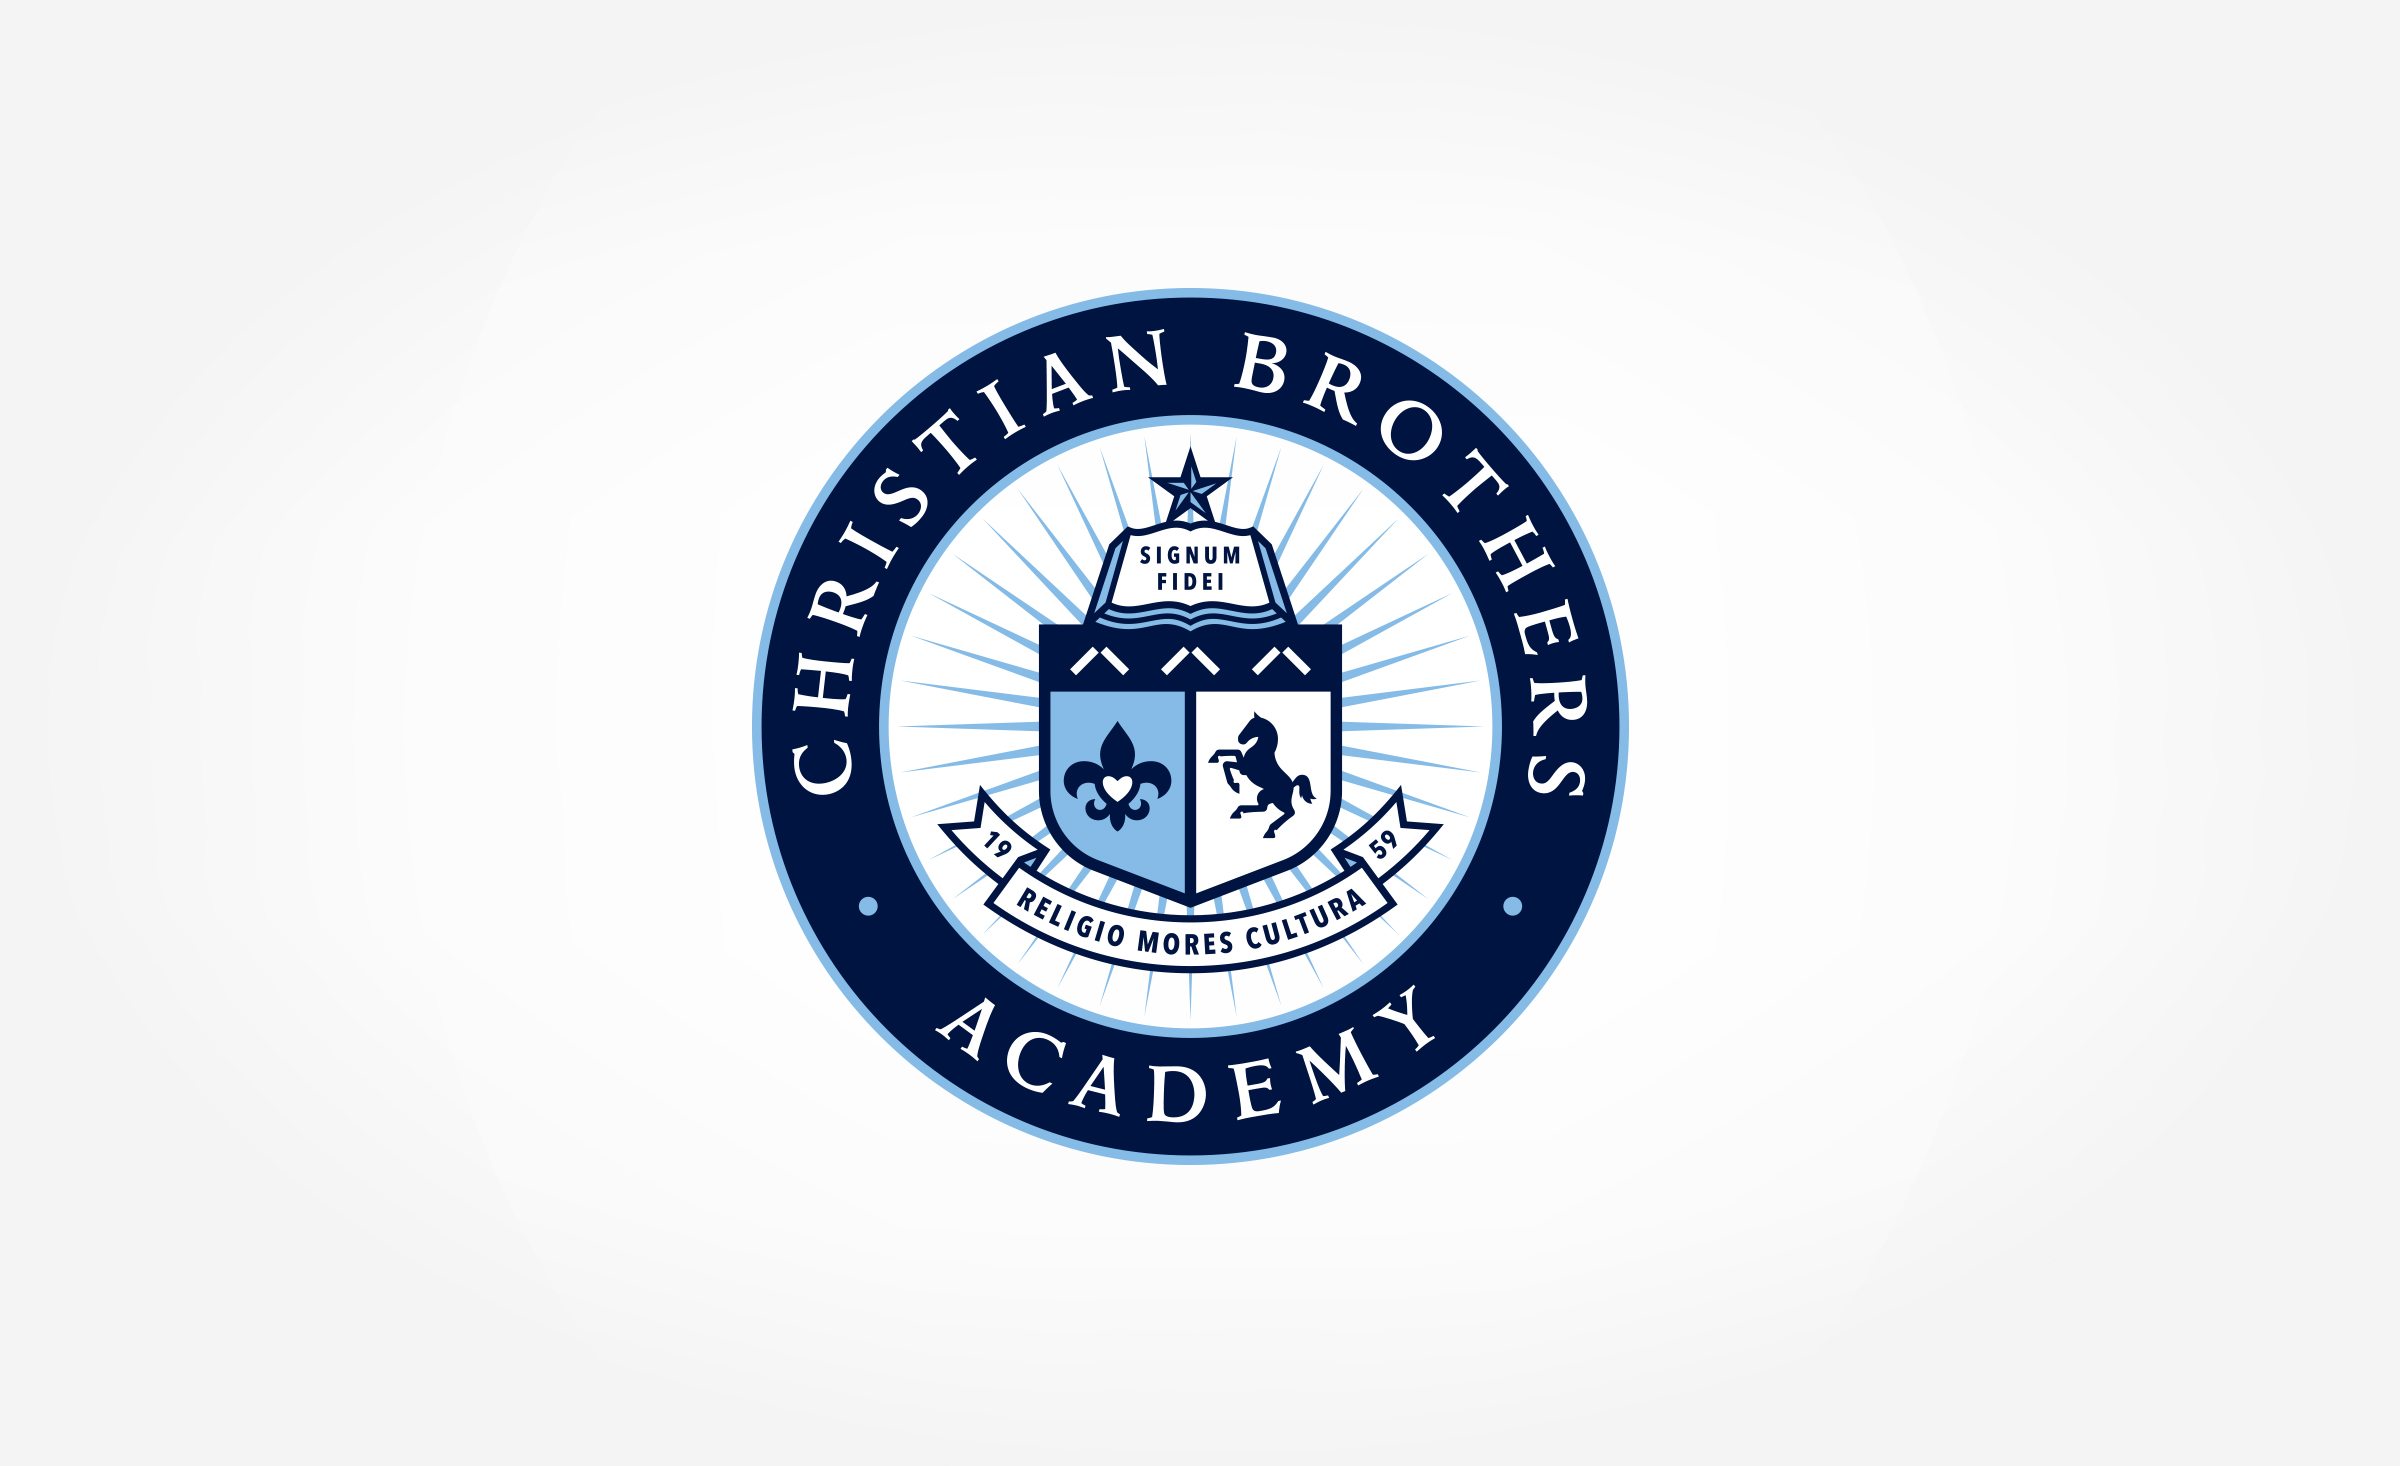 Logo design for Christian Brothers Academy.